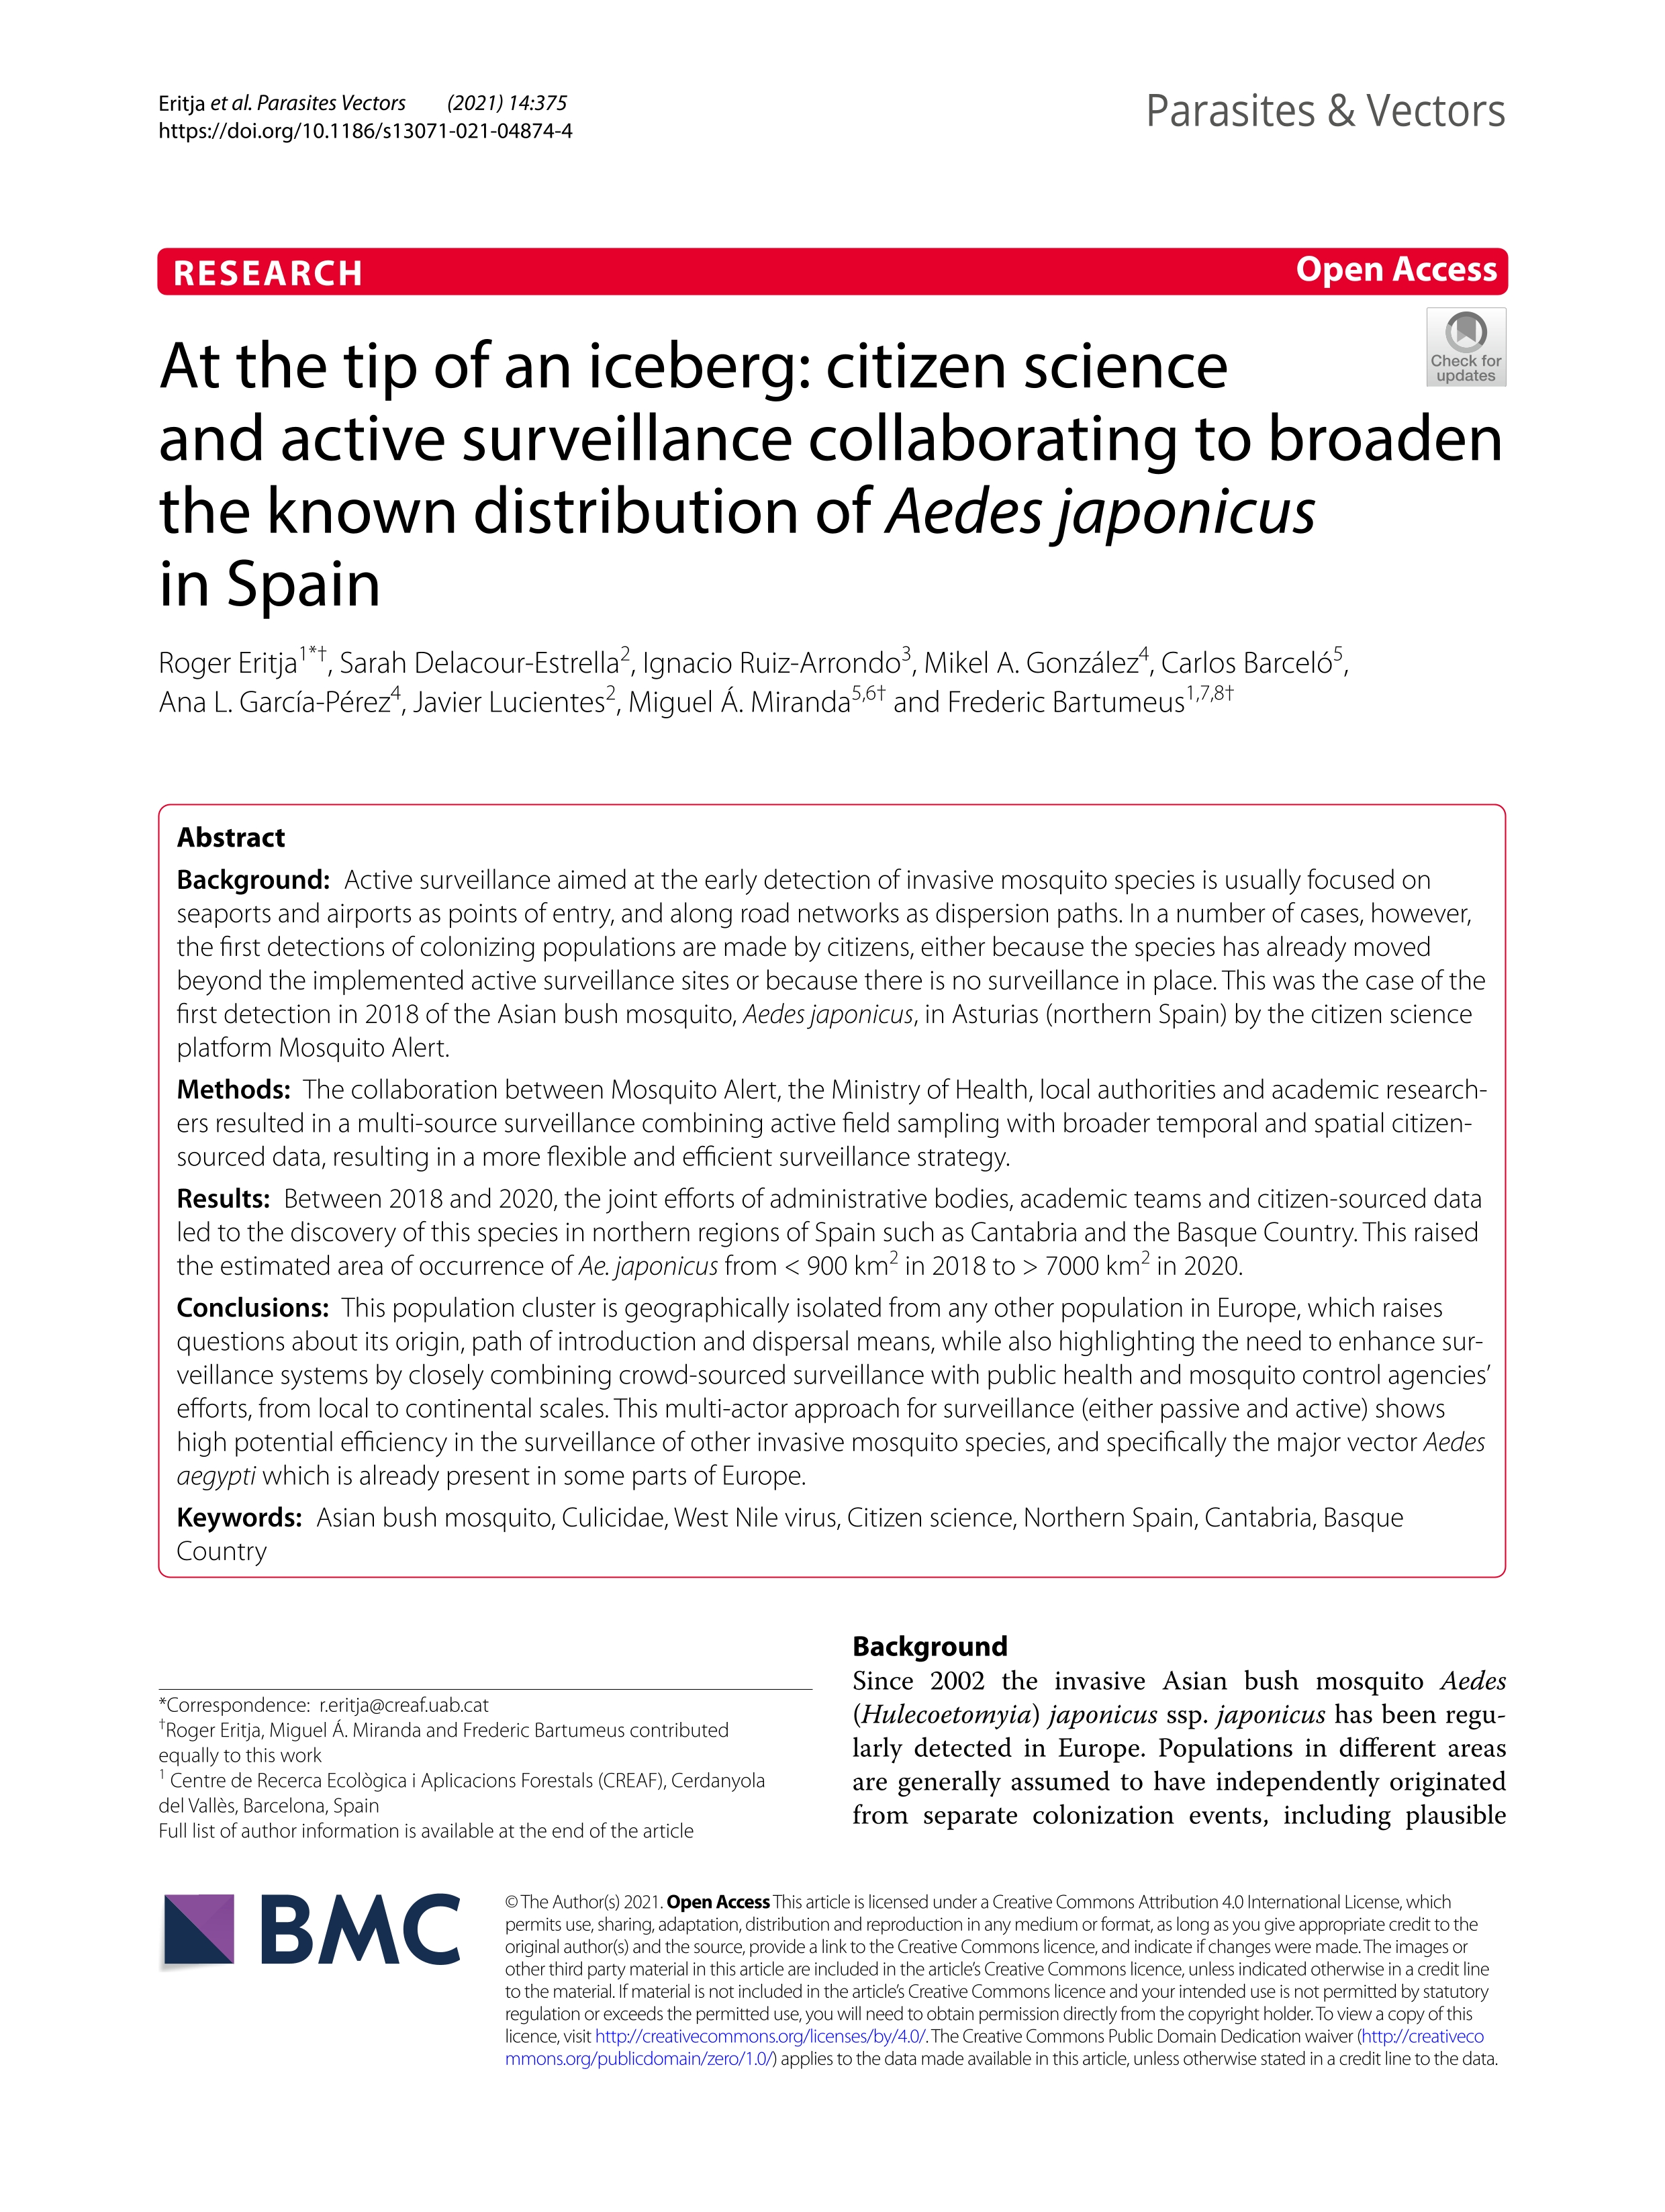 At the tip of an iceberg: citizen science and active surveillance collaborating to broaden the known distribution of Aedes japonicus in Spain